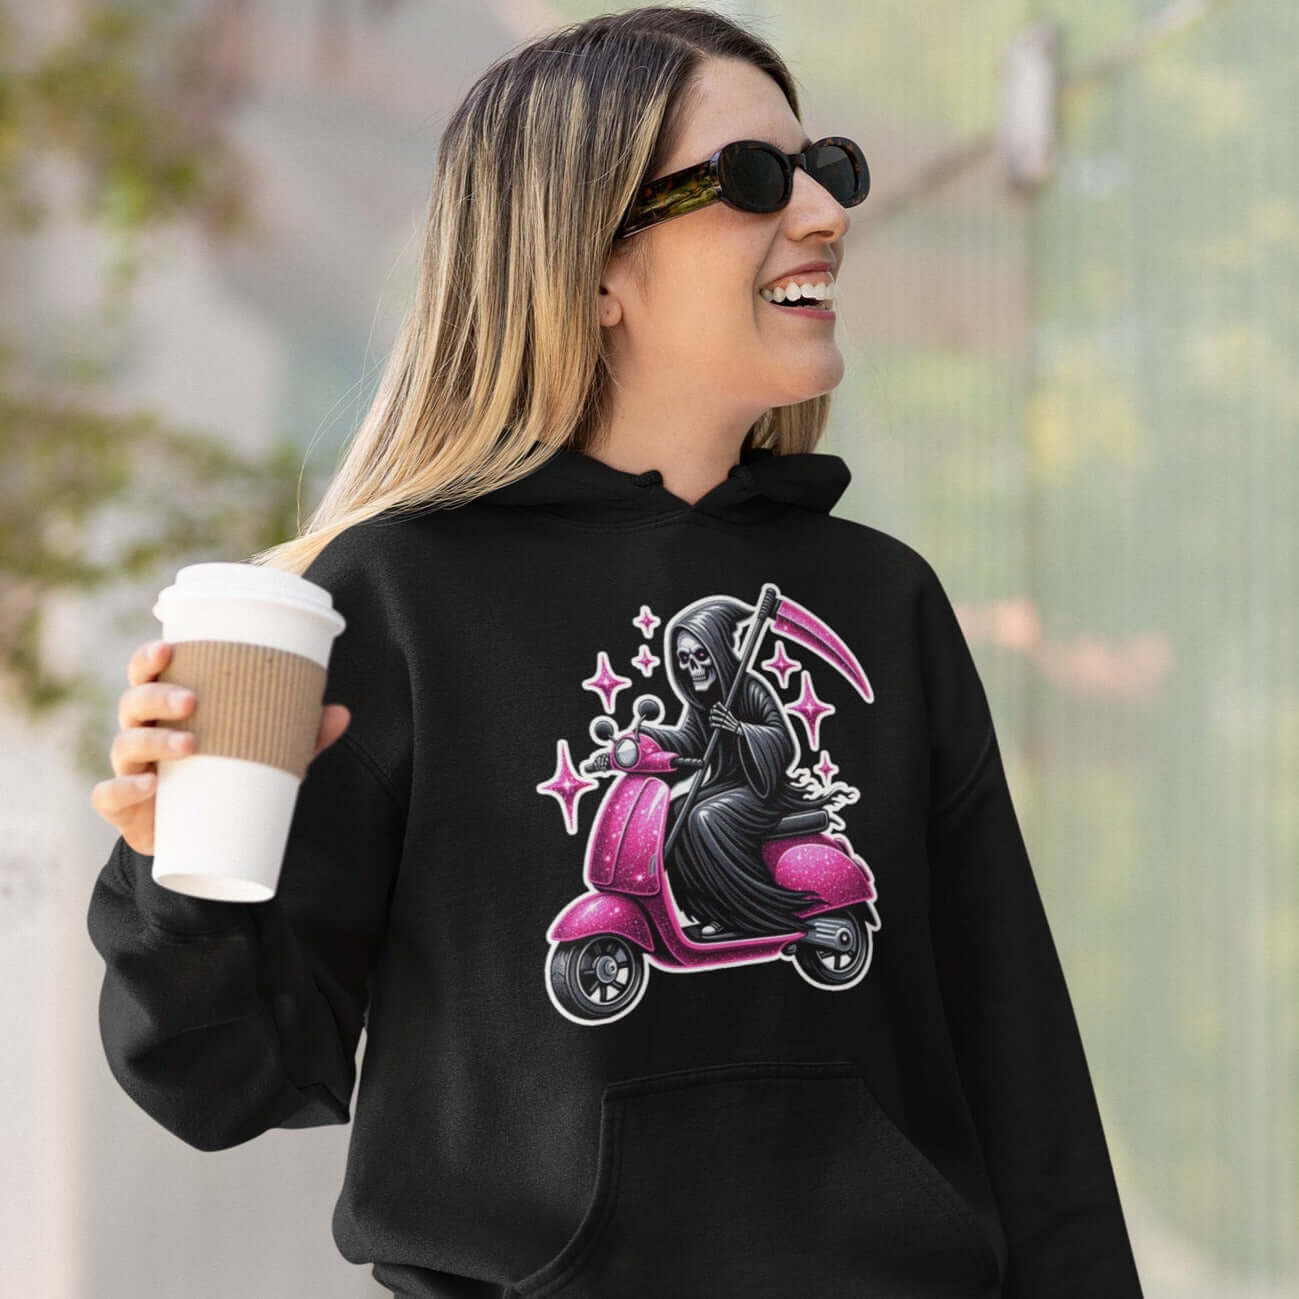 Woman wearing a black hoodie sweatshirt with funny image of the Grim Reaper riding on a glam pink scooter printed on the front.